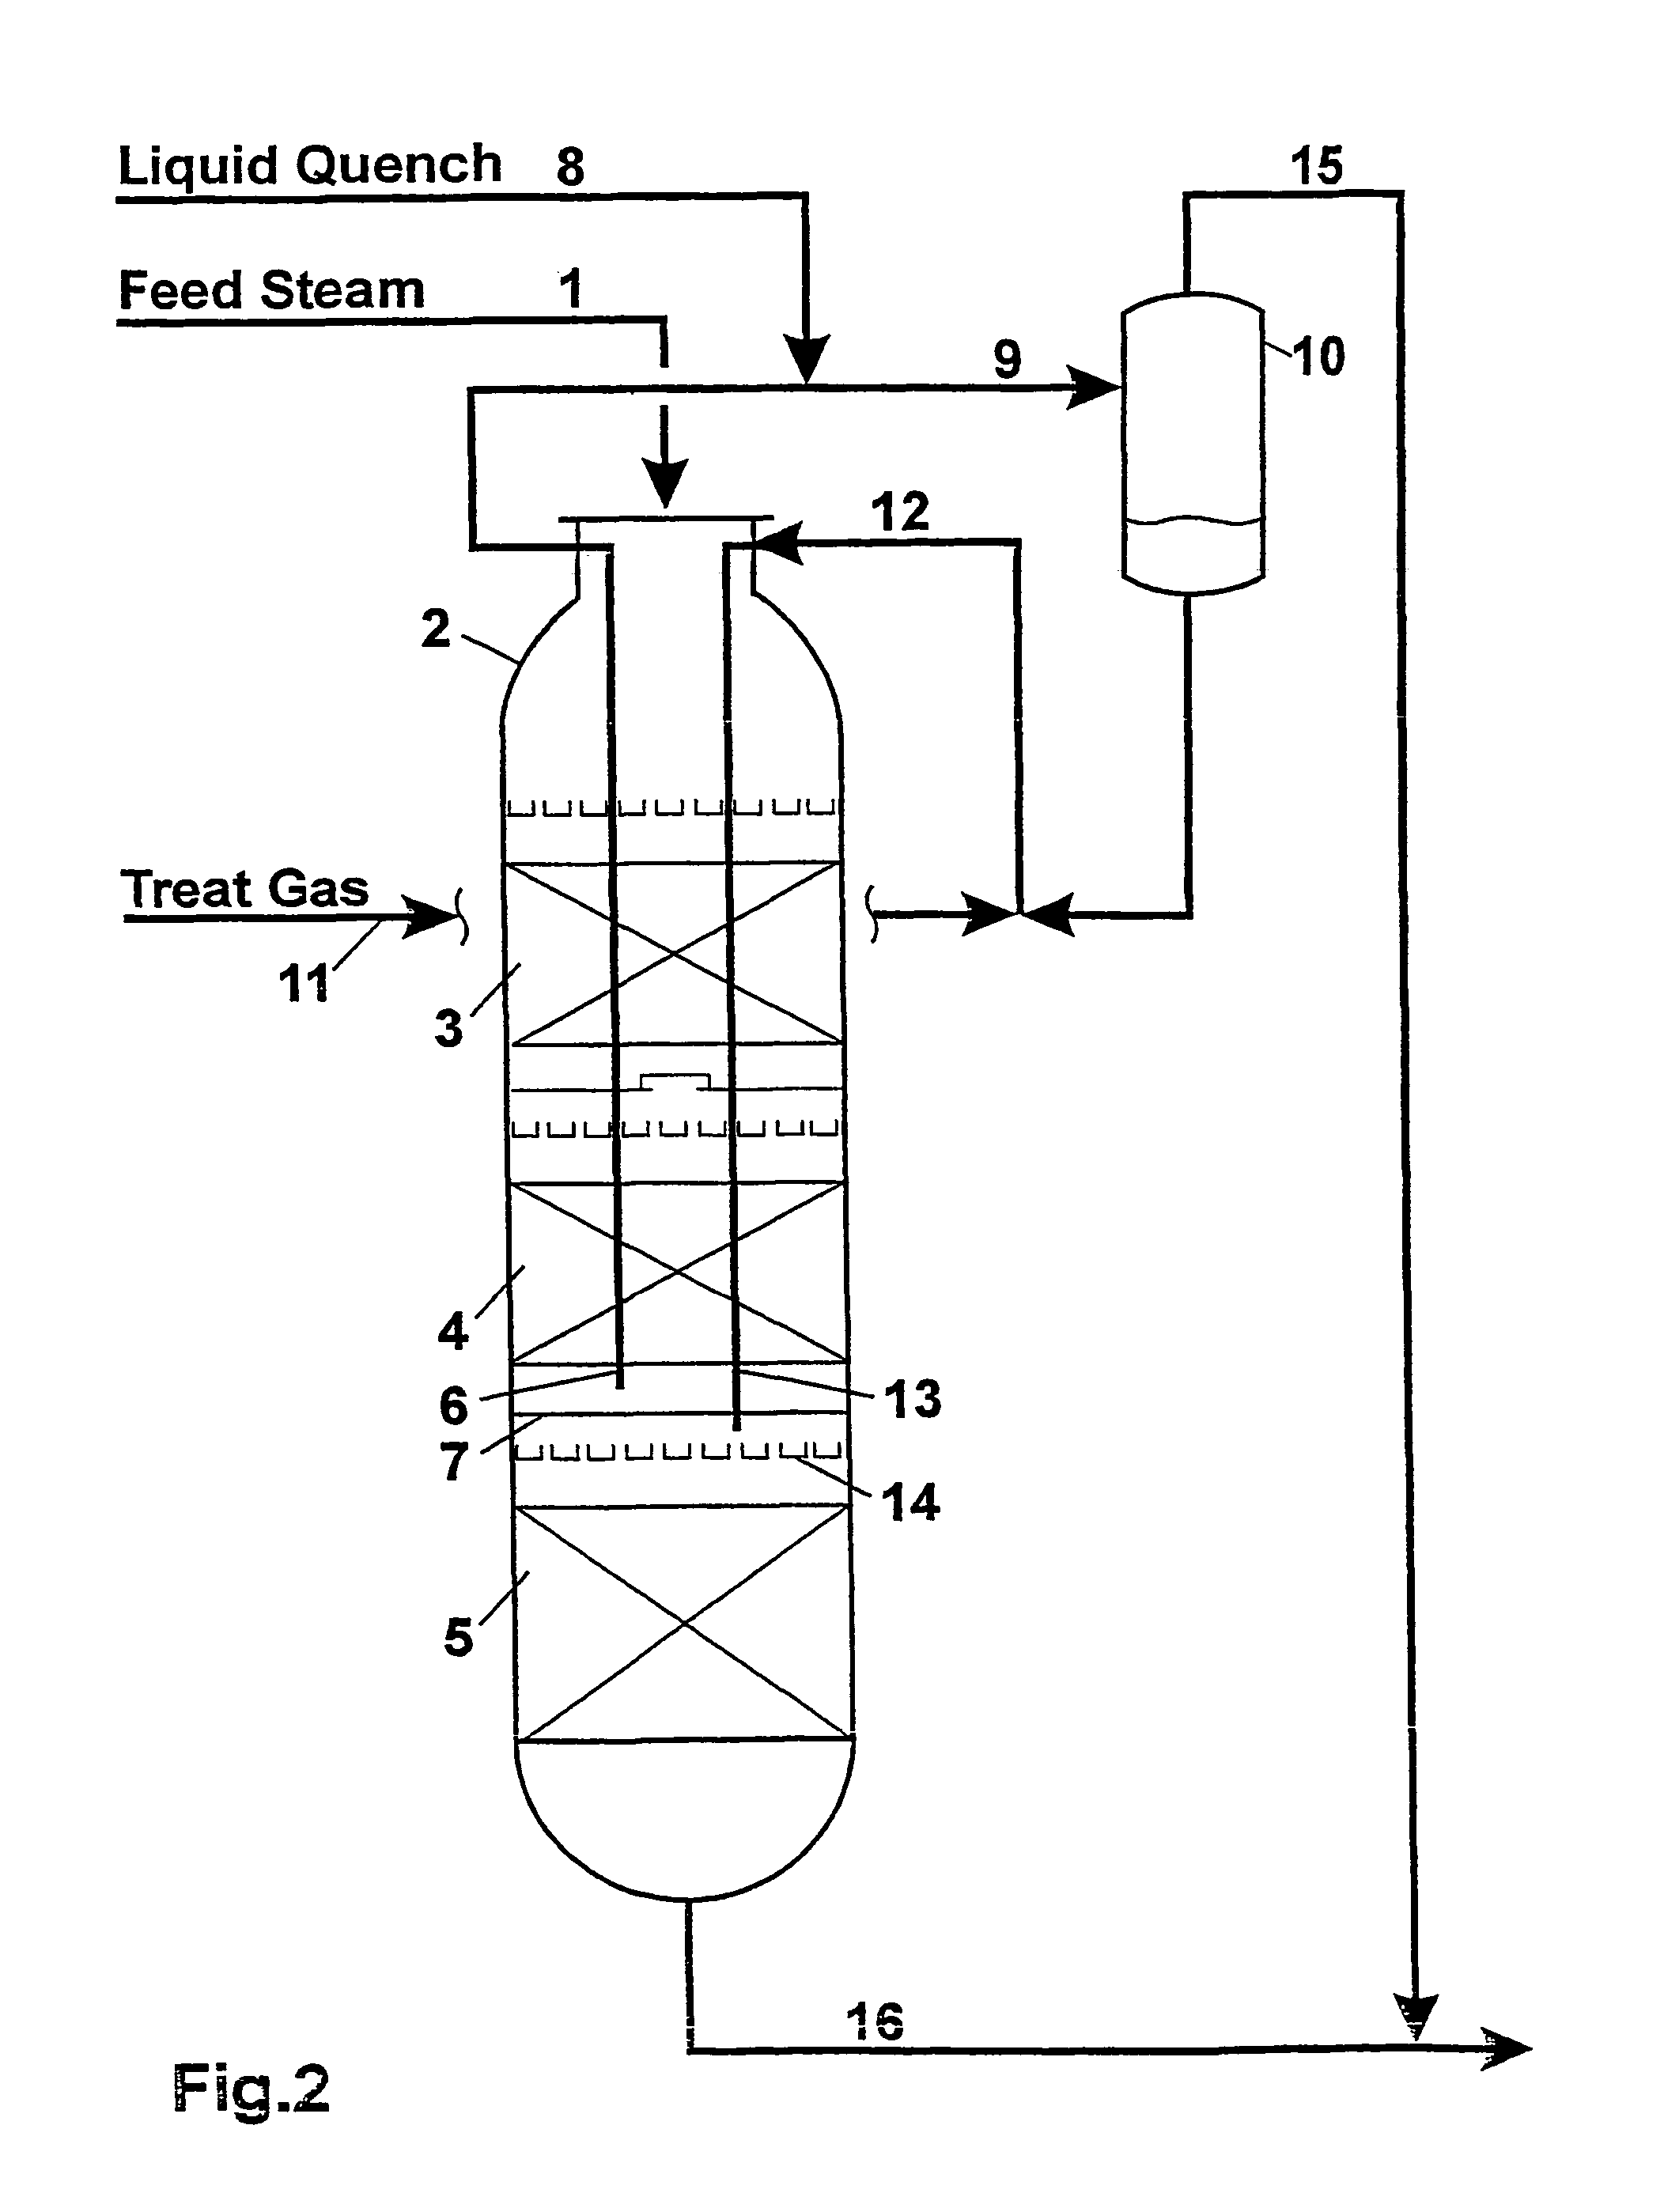 Hydroprocessing process and method of retrofitting existing hydroprocessing reactors